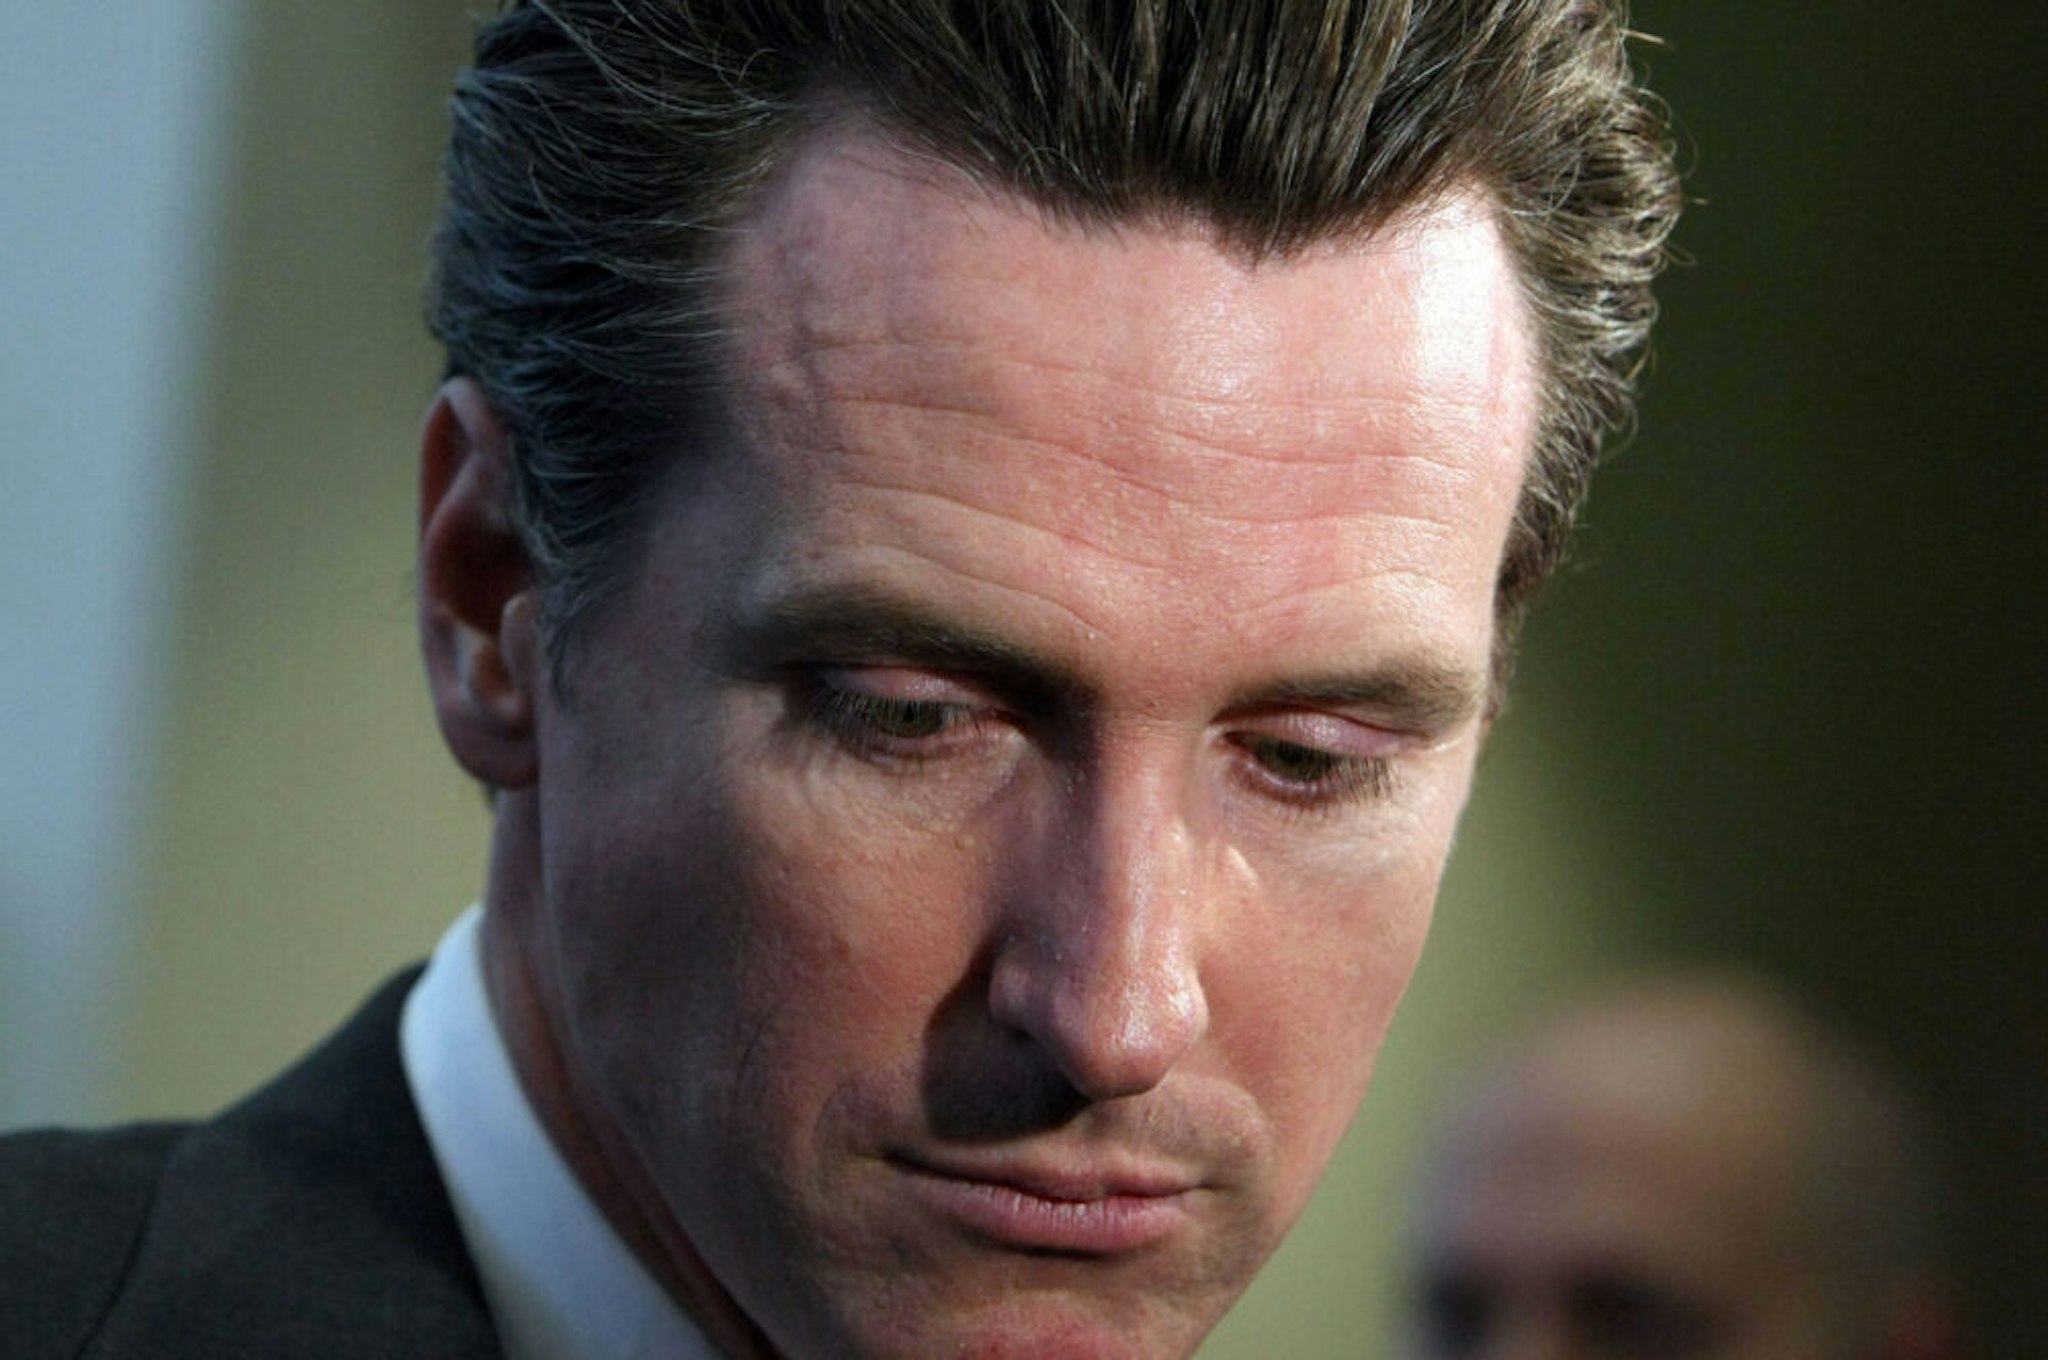 SAN FRANCISCO - OCTOBER 27: San Francisco mayor Gavin Newsom pauses while speaking at the grand opening of the new Charles Schwab office October 27, 2009 in San Francisco, California. After one year on the campaign trail, San Francisco mayor Gavin Newsom dropped out of the race for California governor on October 30, 2009.